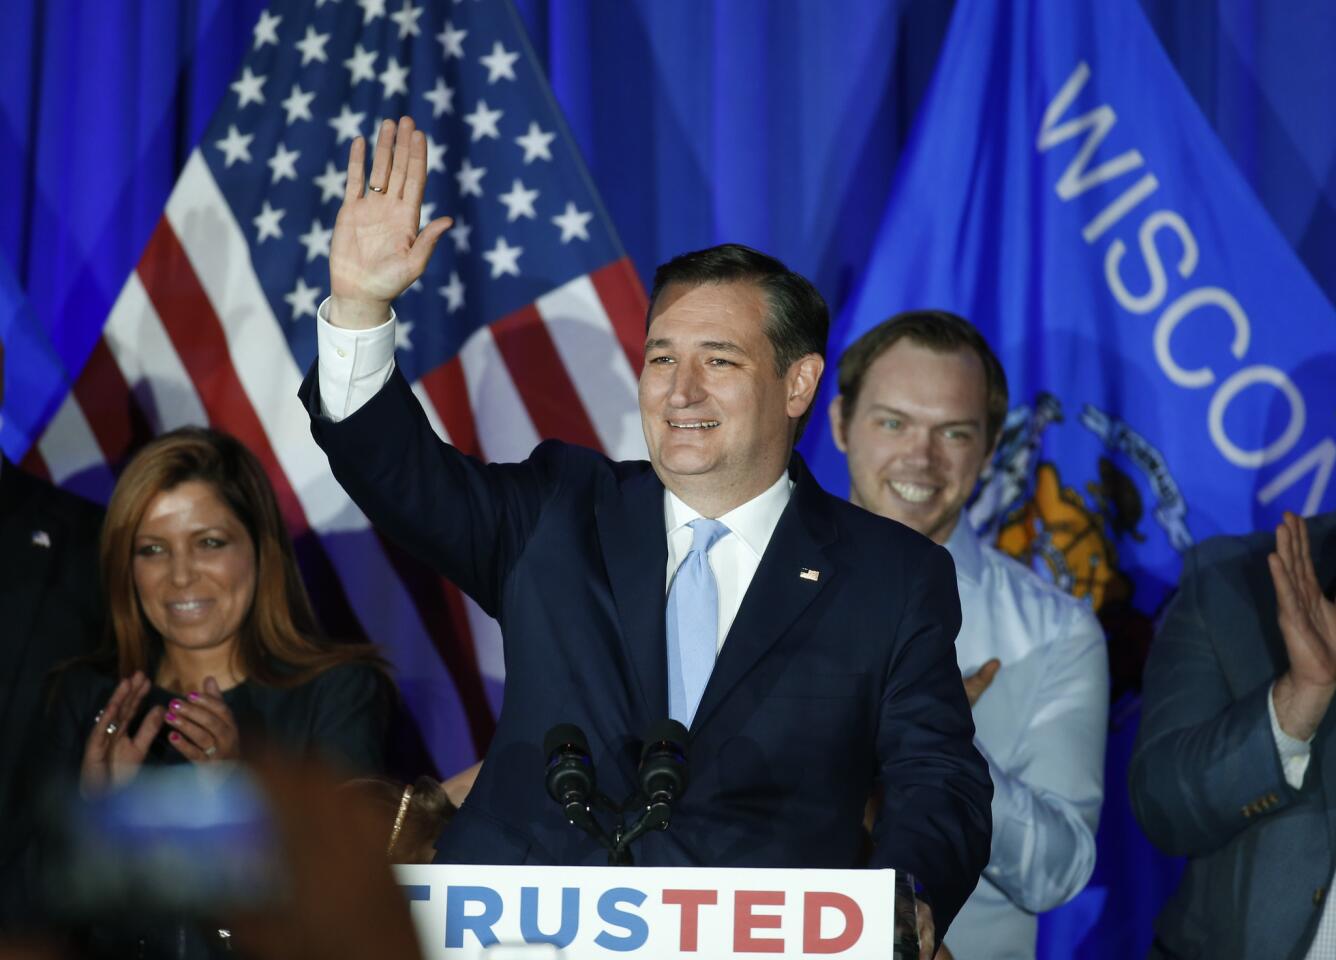 Sen. Ted Cruz, R-Texas, waves during a Milwaukee rally after winning the Republican presidential primary in Wisconsin on April 5, 2016.